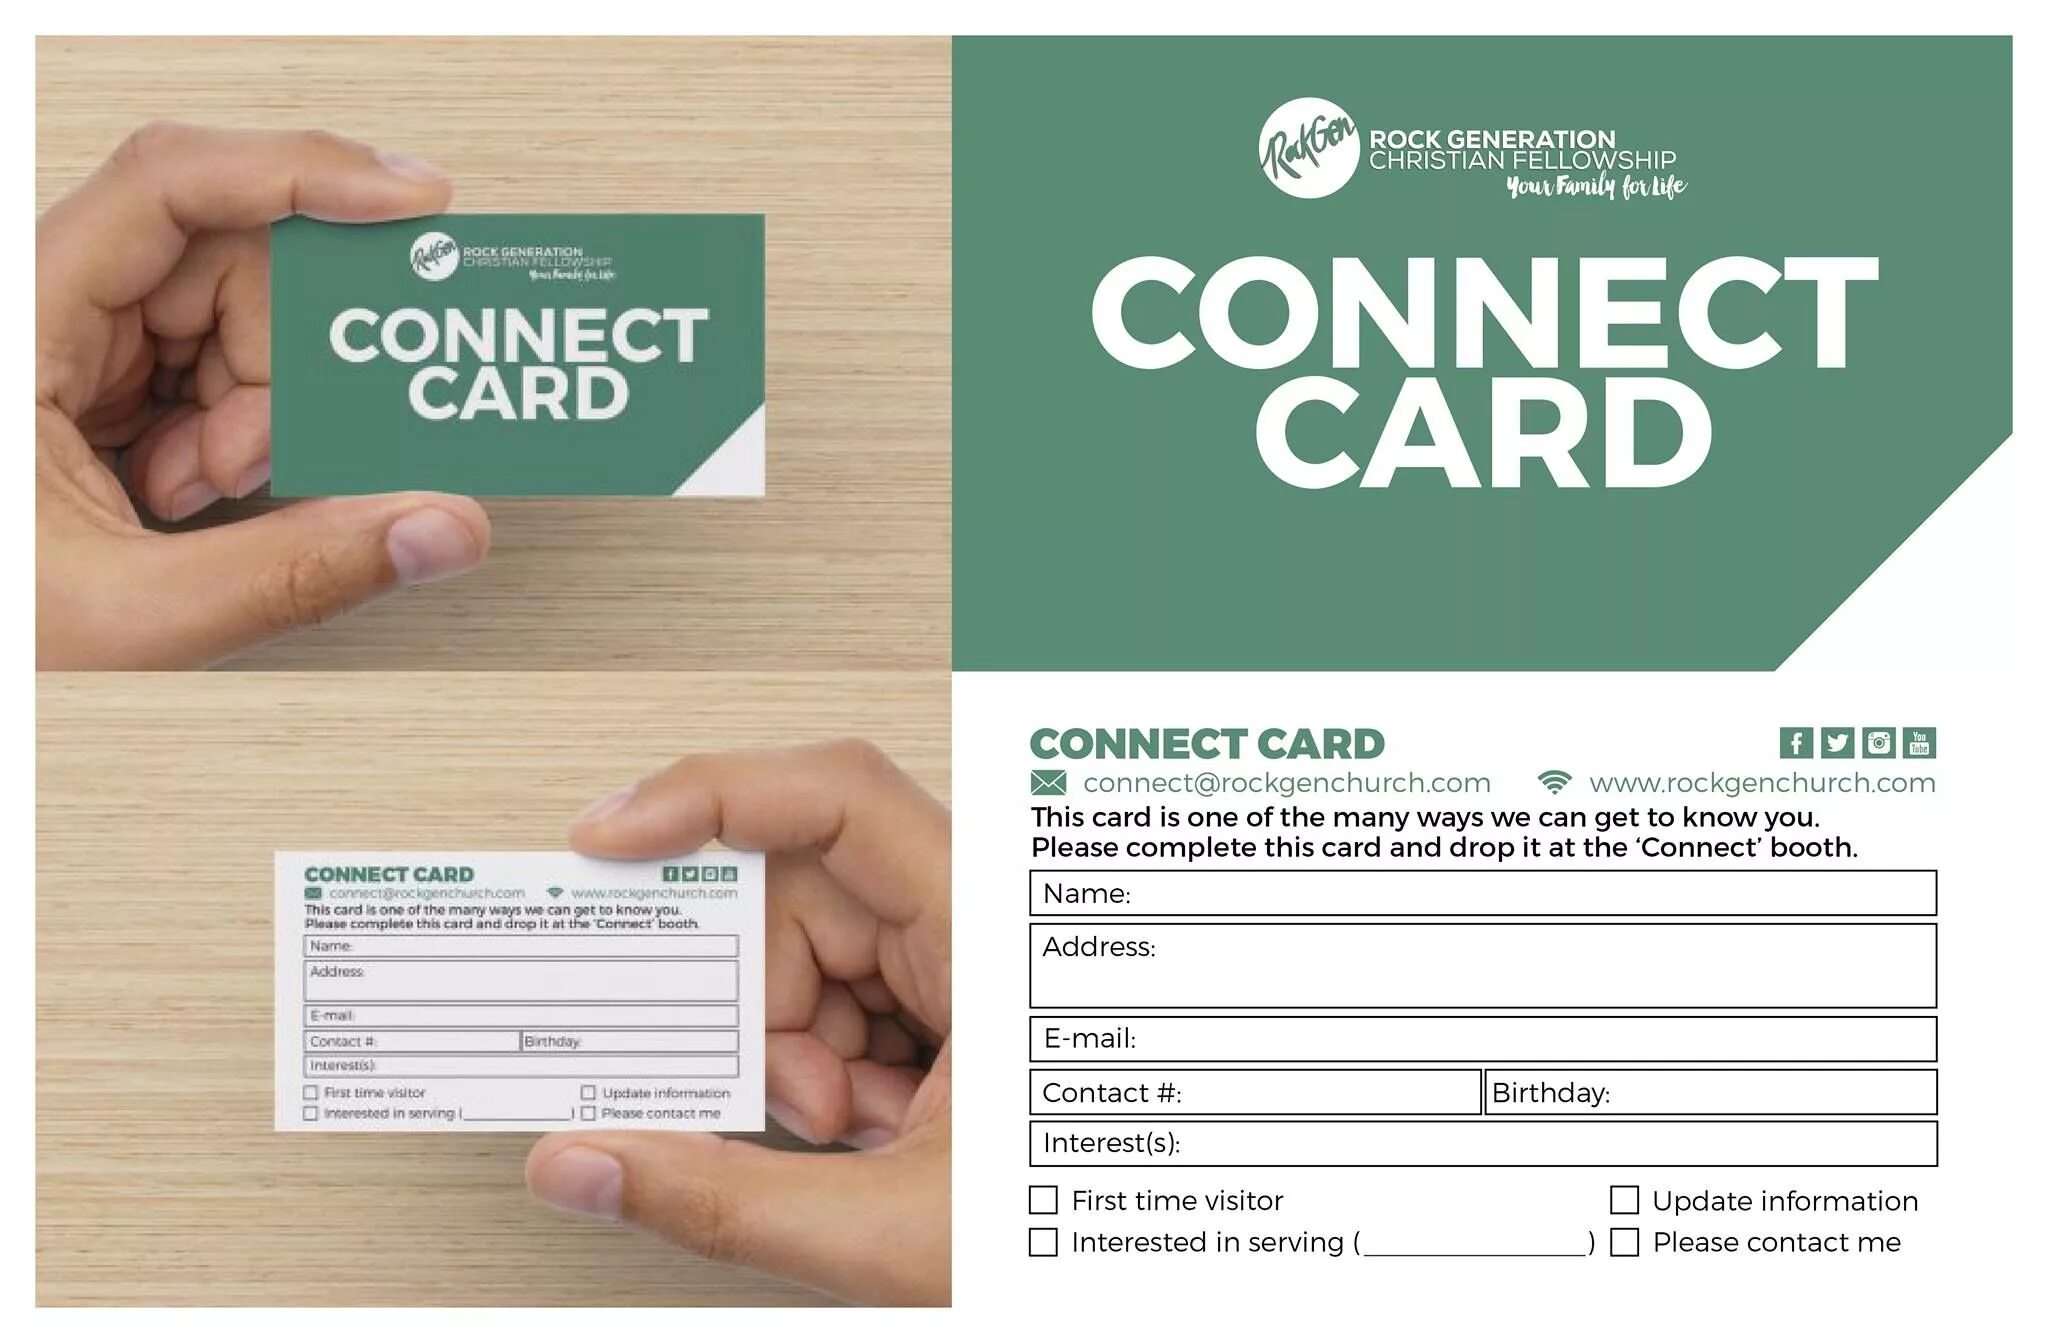 This card connect. Dilap connection Card. Templates for Visitor Card. Media Team Church. Media Card examples.